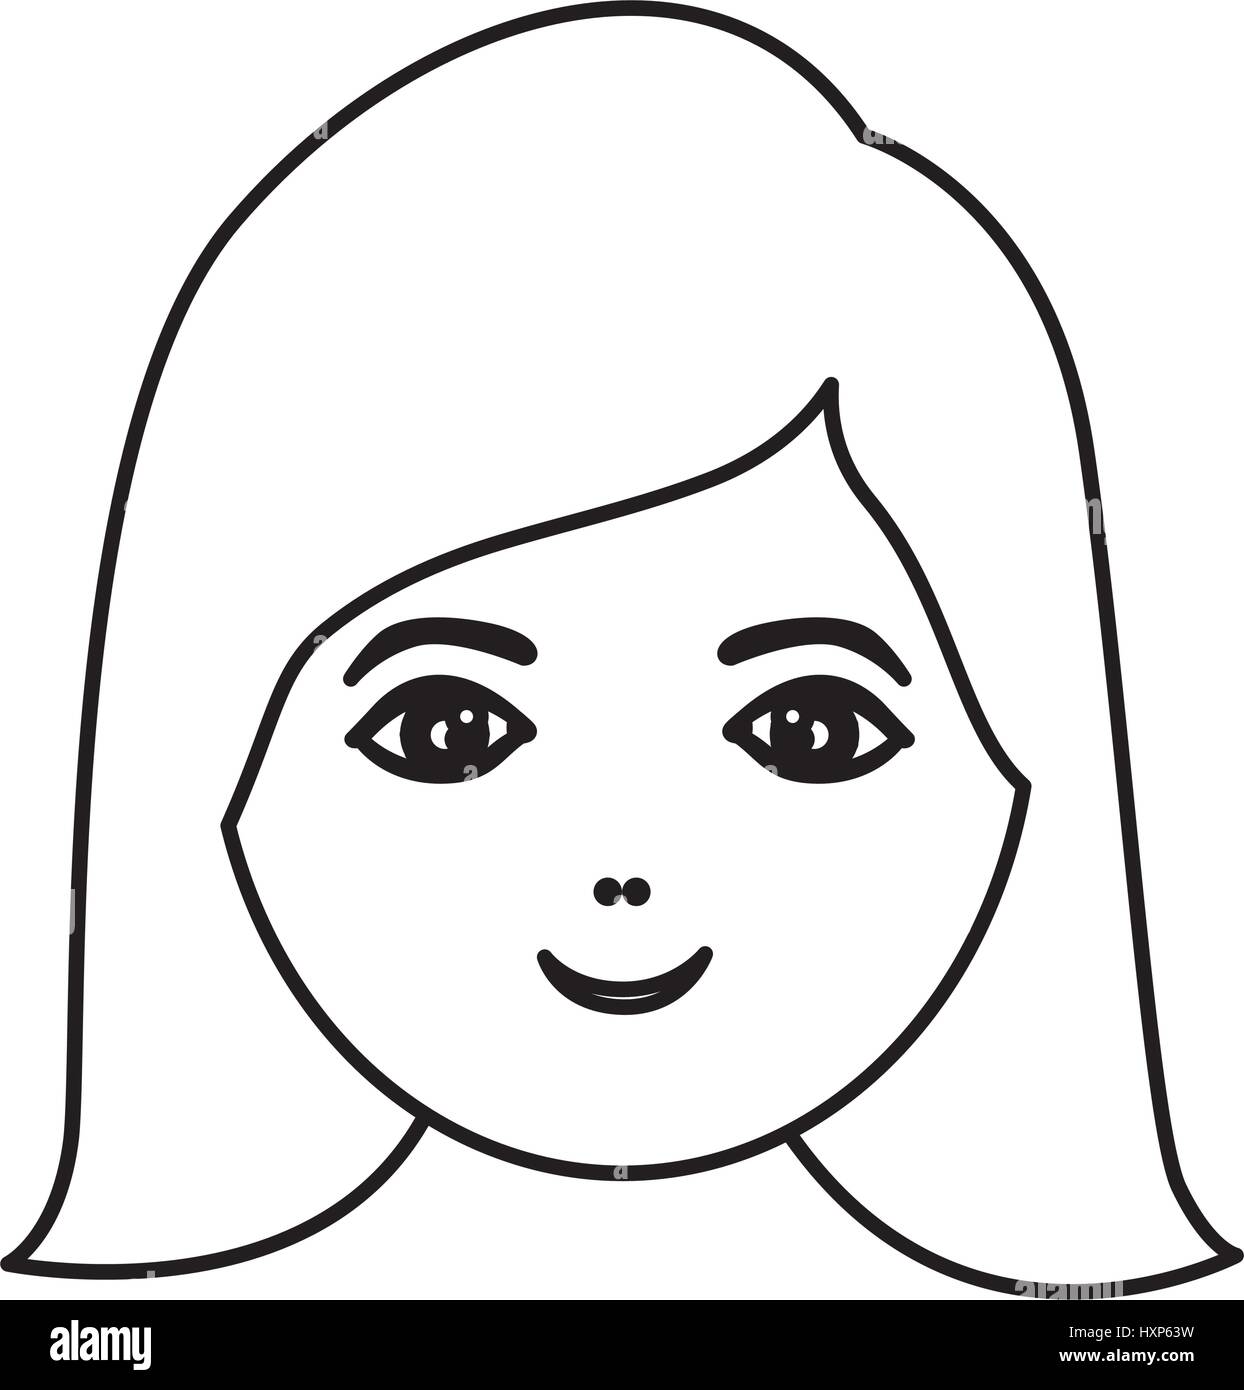 Lady Face Outline High Resolution Stock Photography and Images - Alamy